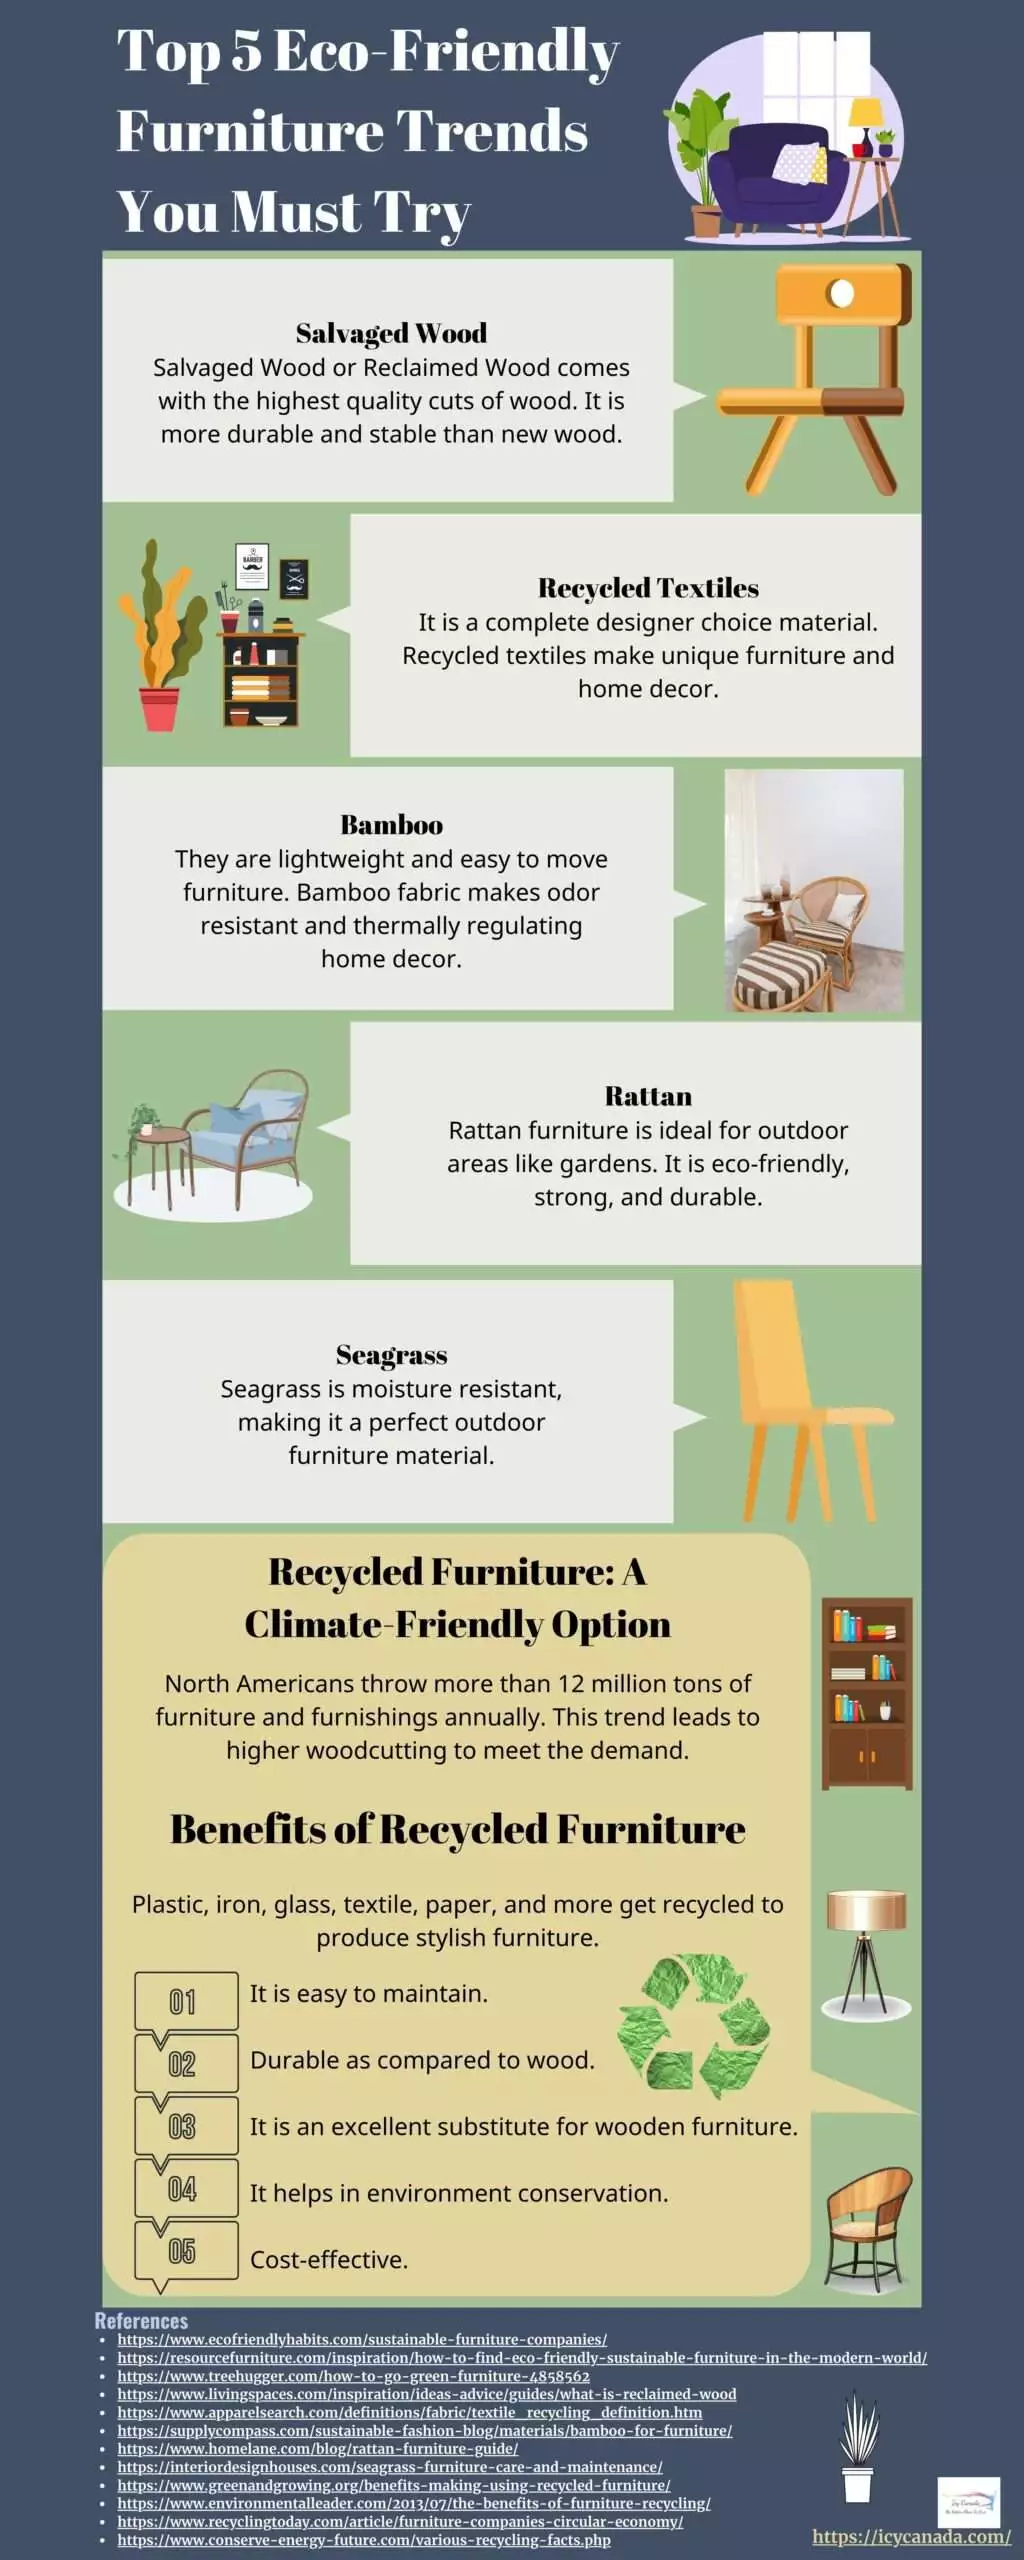 Top 5 Eco-Friendly Furniture Trends You Must Try